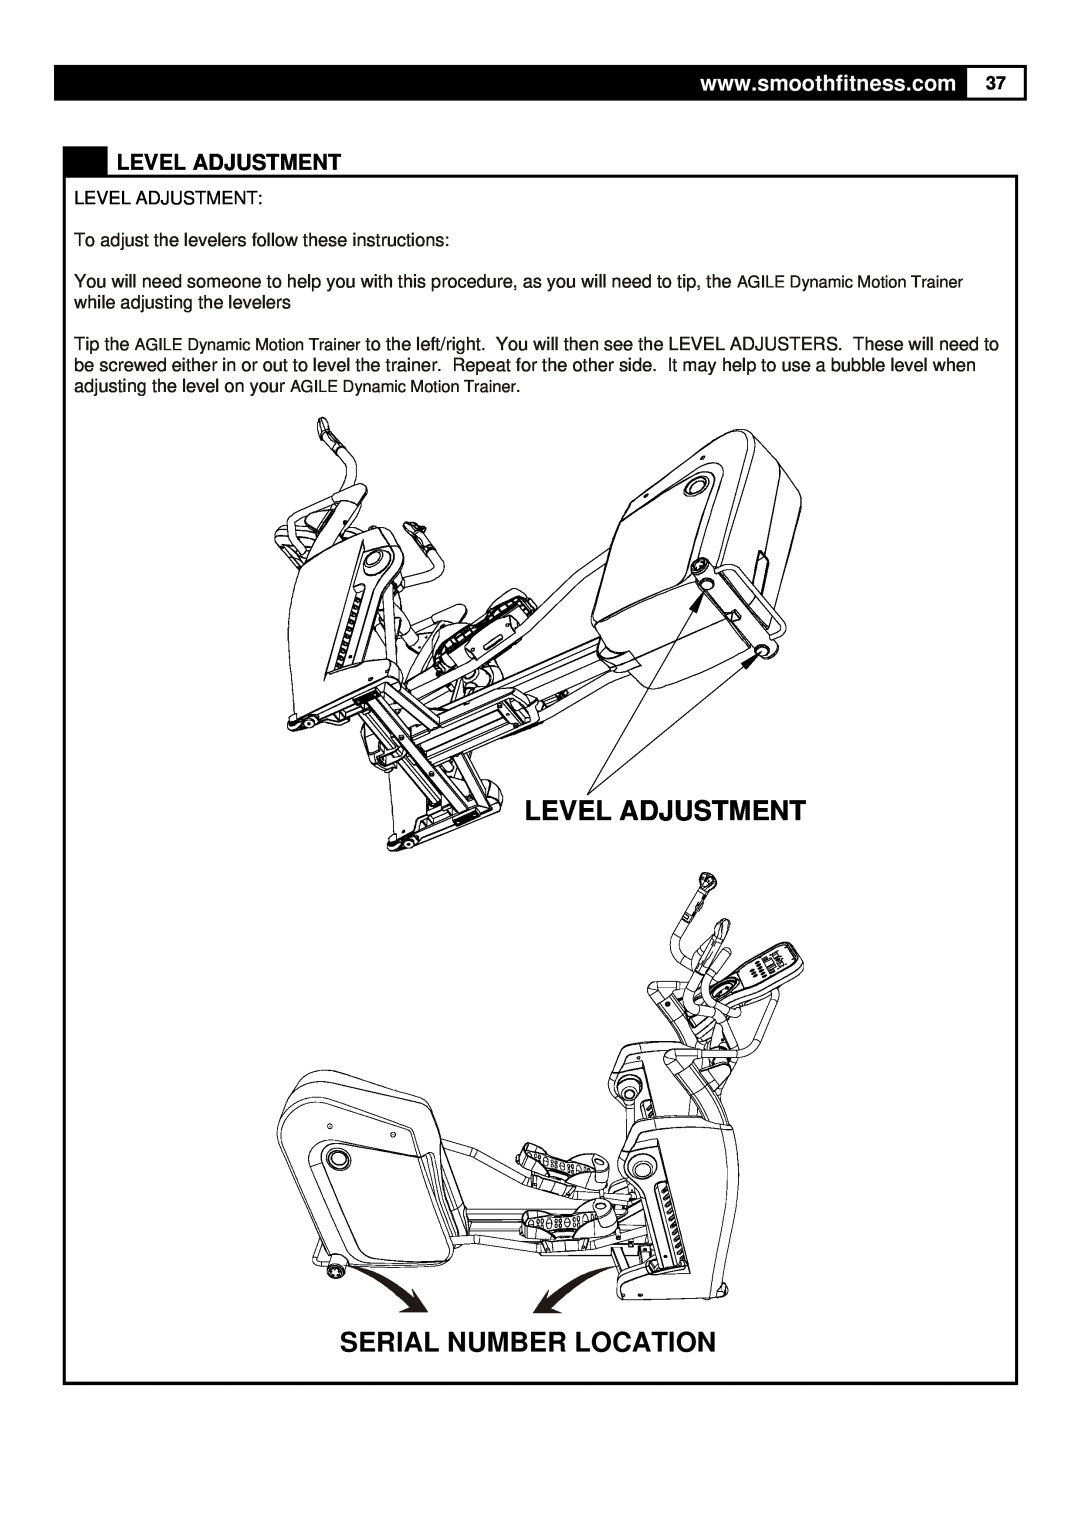 Smooth Fitness 9.25X user manual Level Adjustment Serial Number Location, To adjust the levelers follow these instructions 